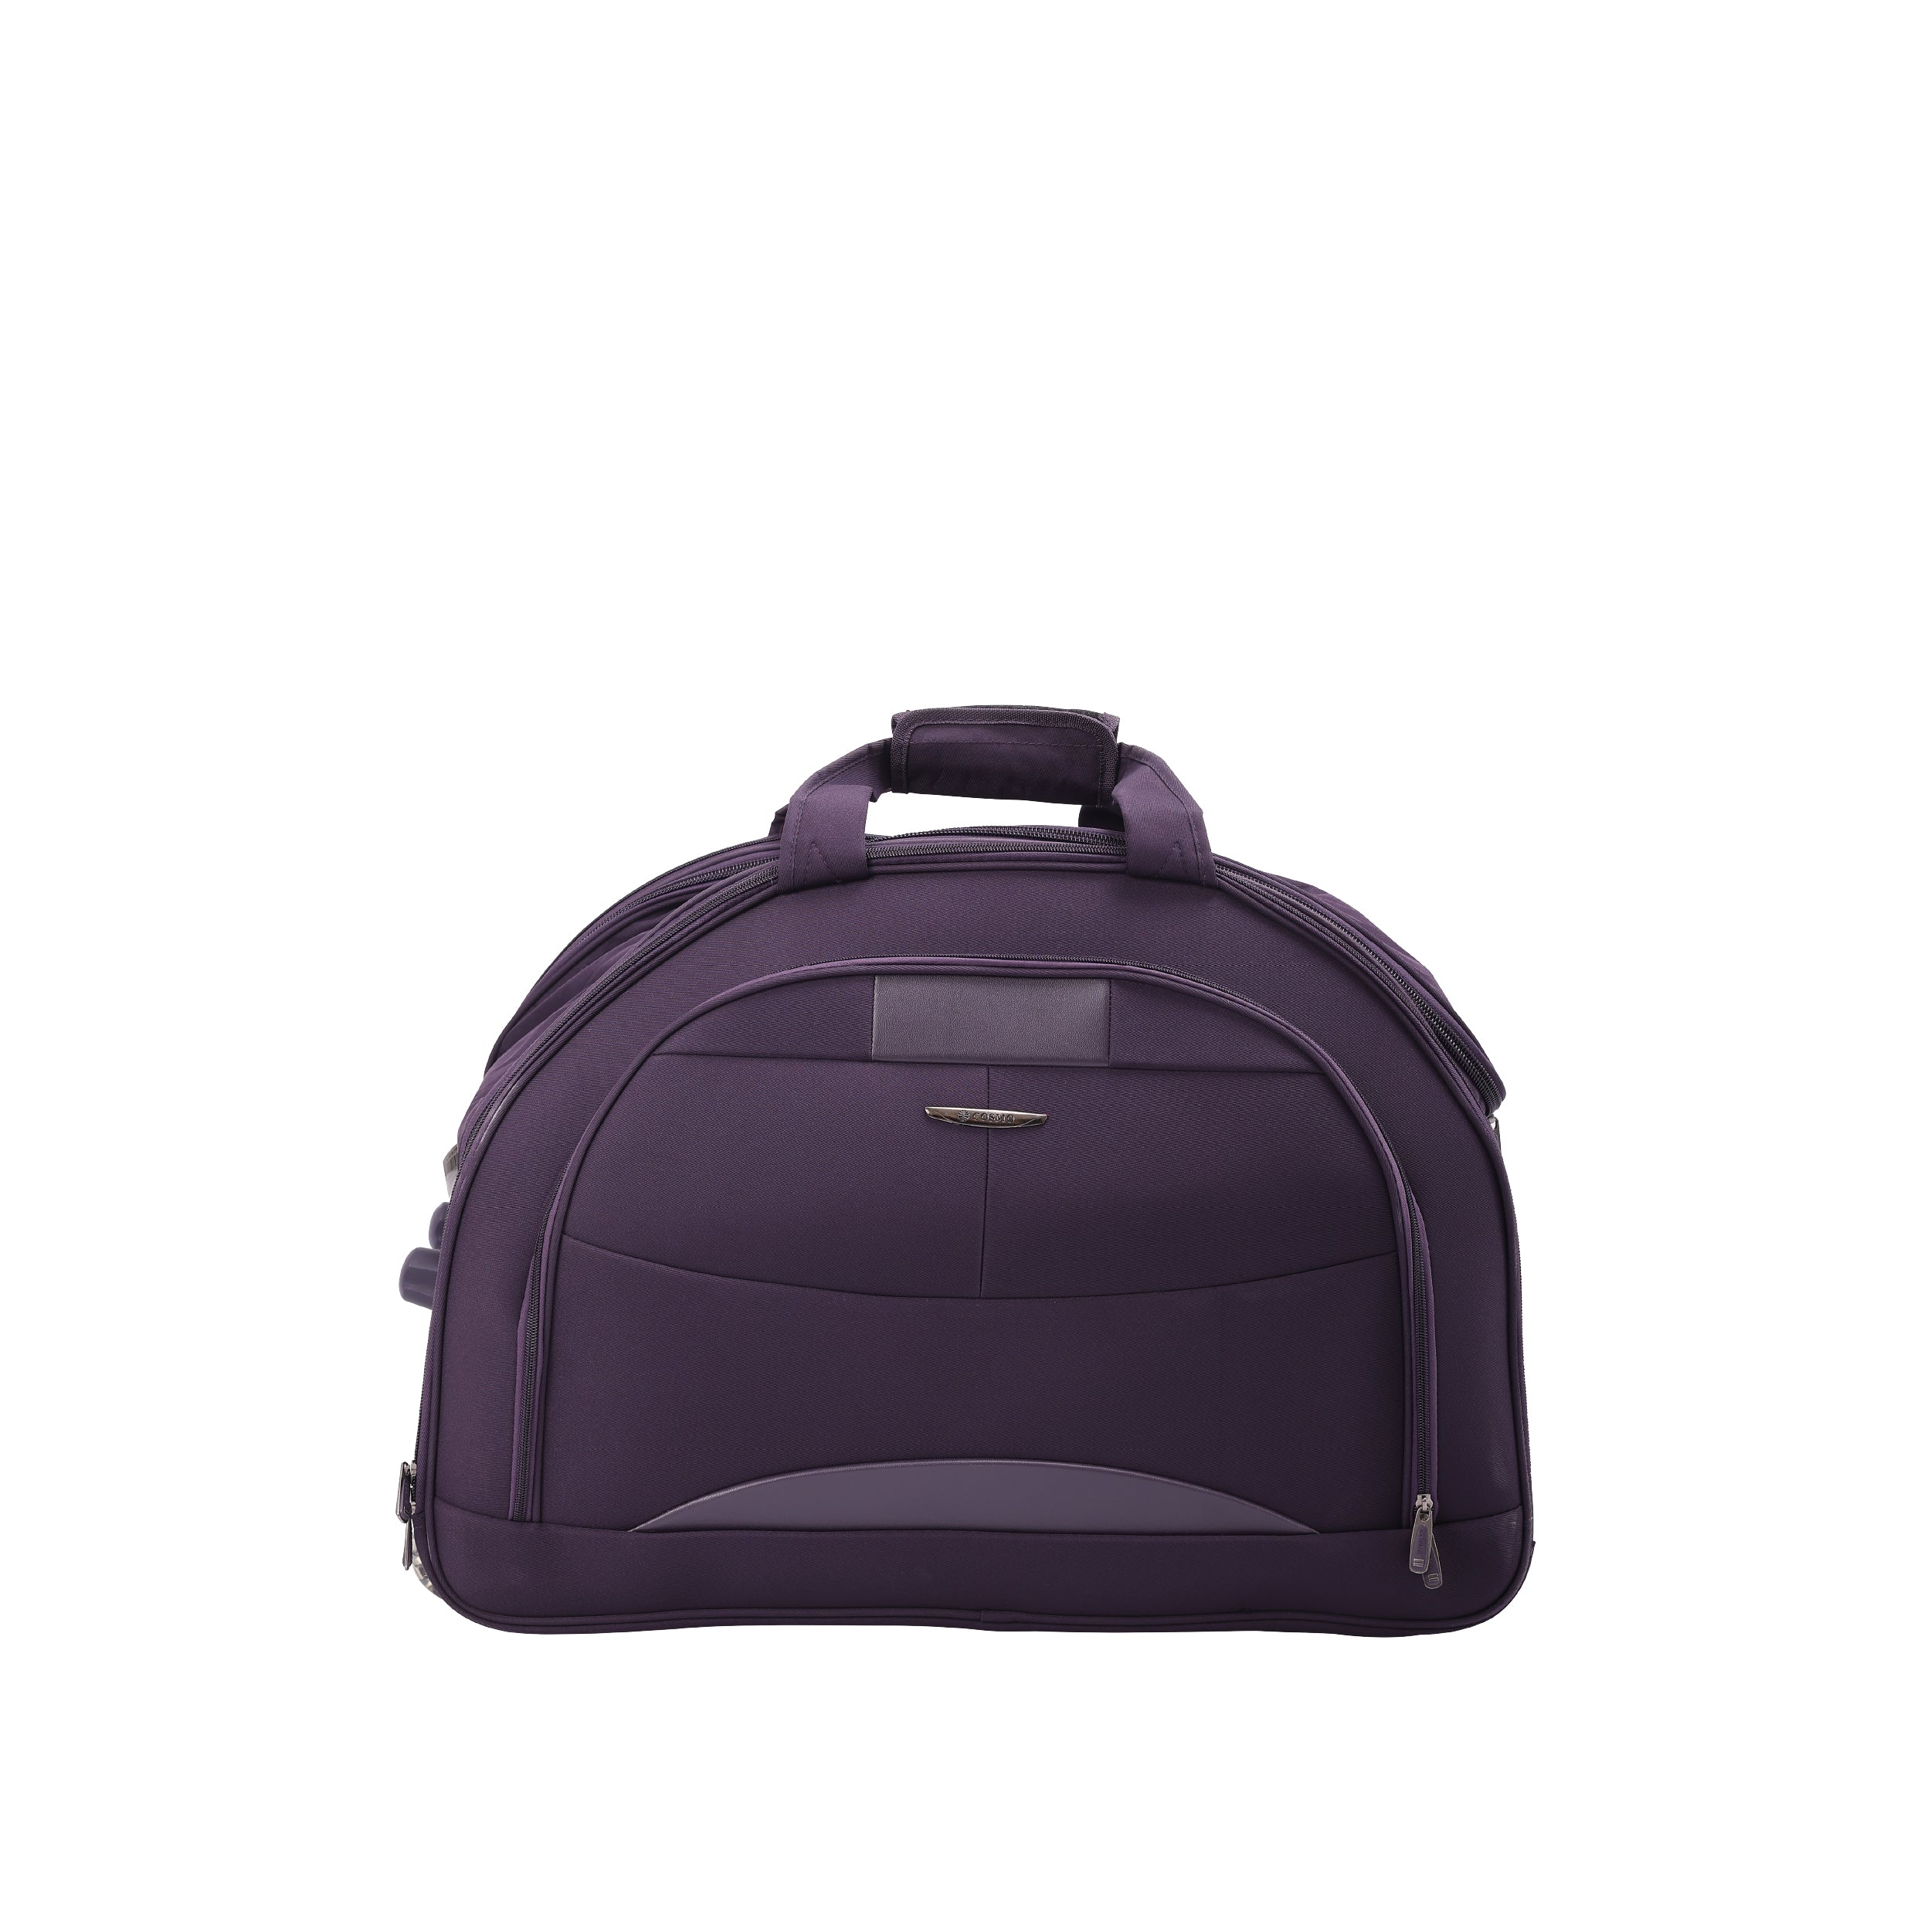 Barron Clothing | 600D Laptop Trolley Bag with Four Wheels